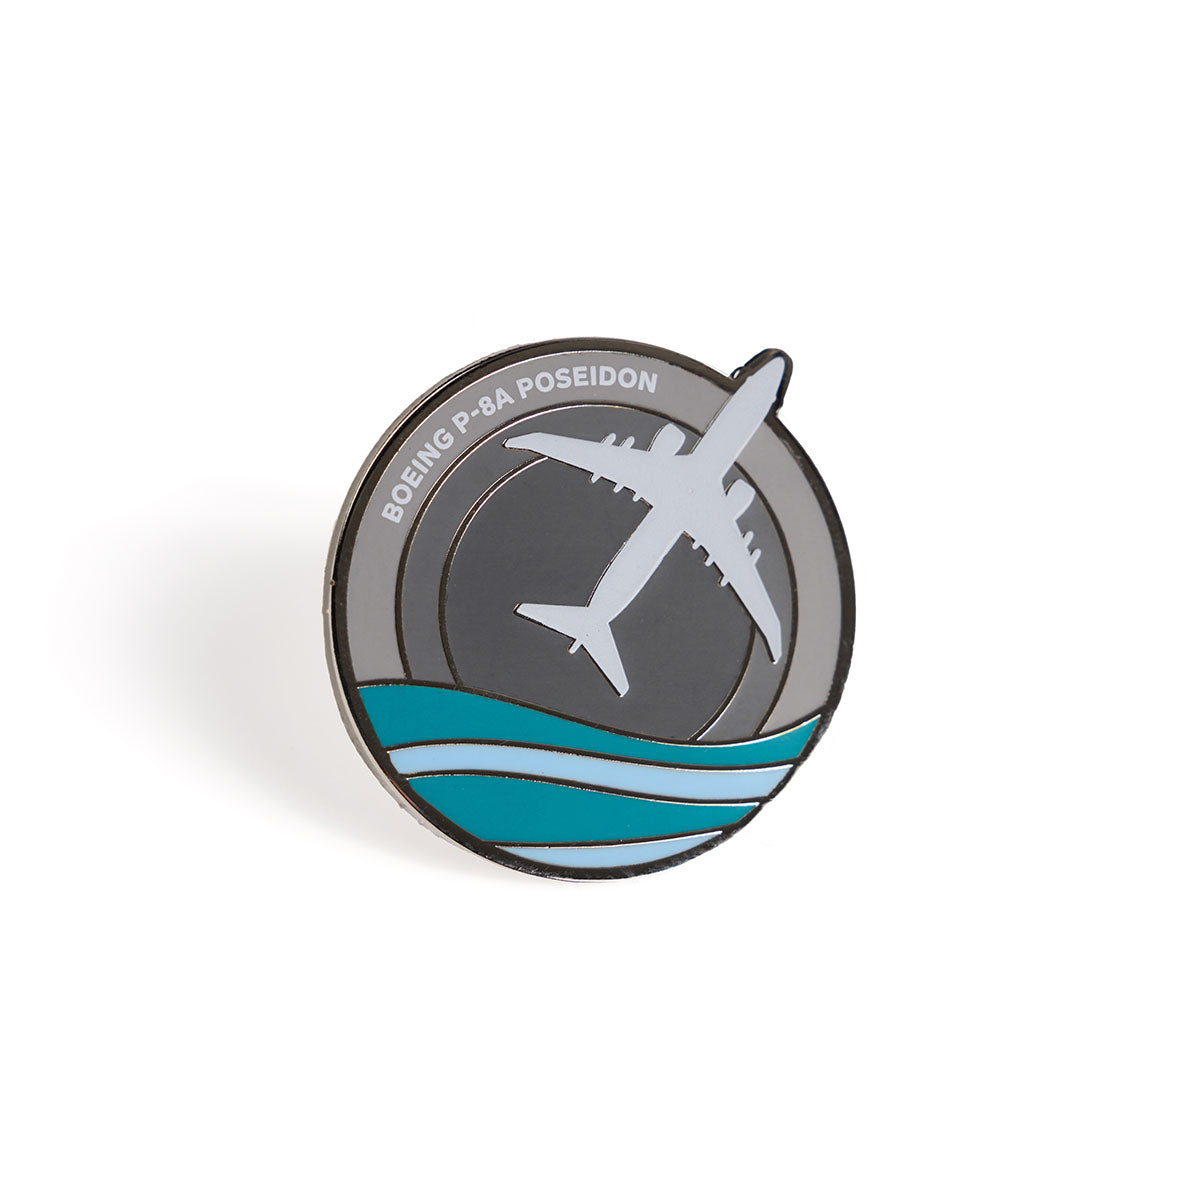 Skyward lapel pin, featuring the iconic Boeing P-8 Poseidon in an enamel roundel design.